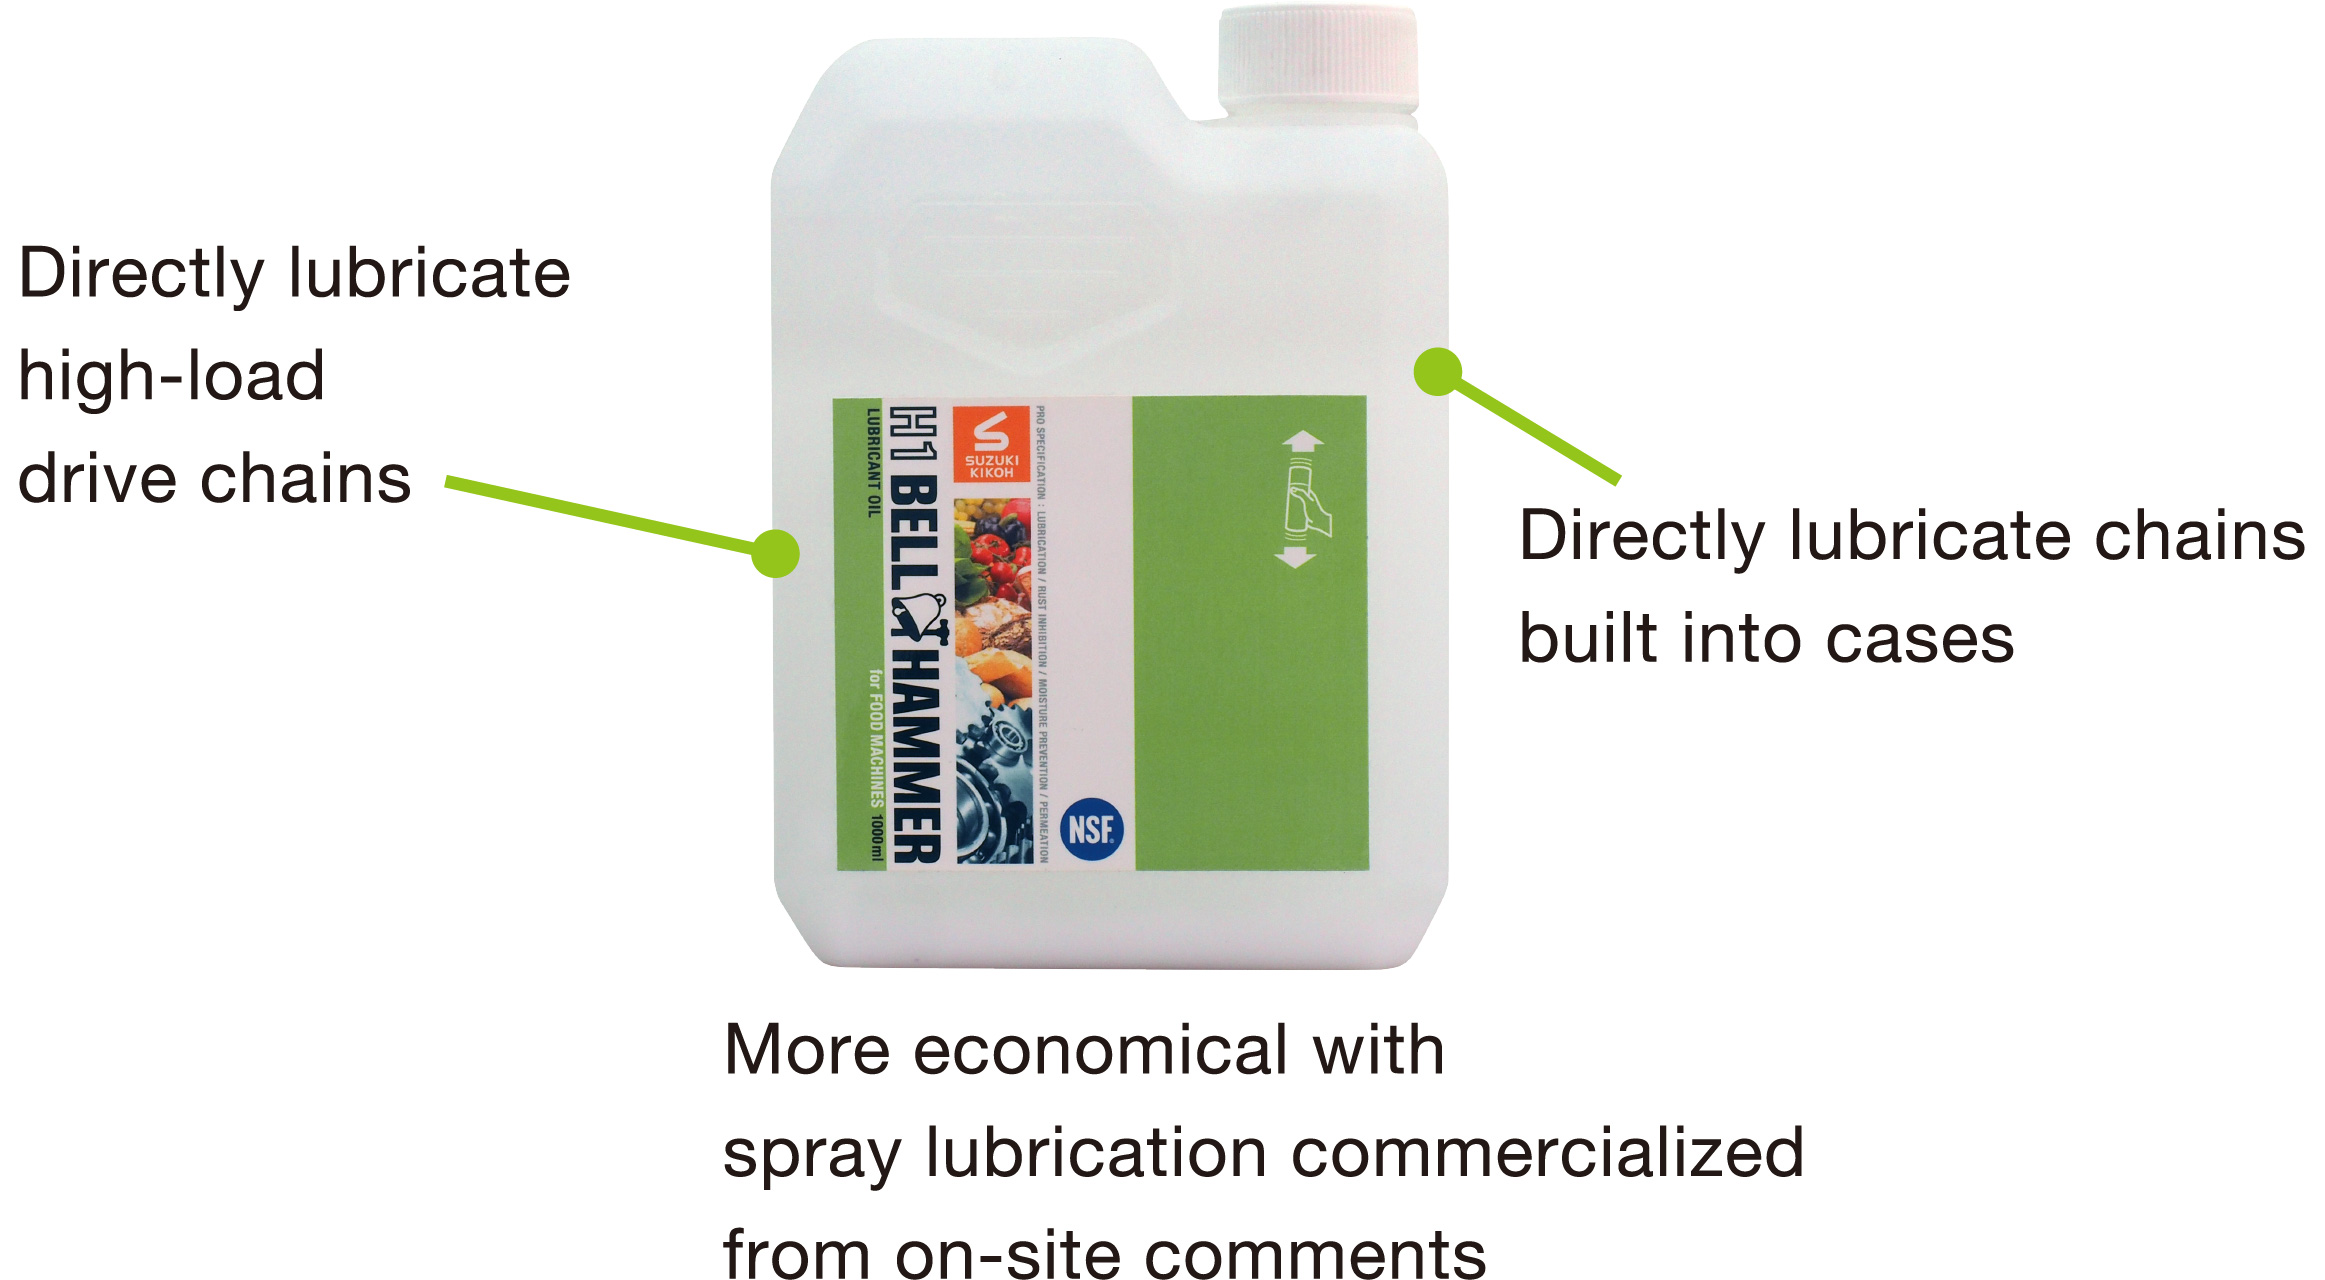 Directly lubricate high-load drive chains. Directly lubricate chains built into cases. More economical with spray lubrication commercialized from on-site comments